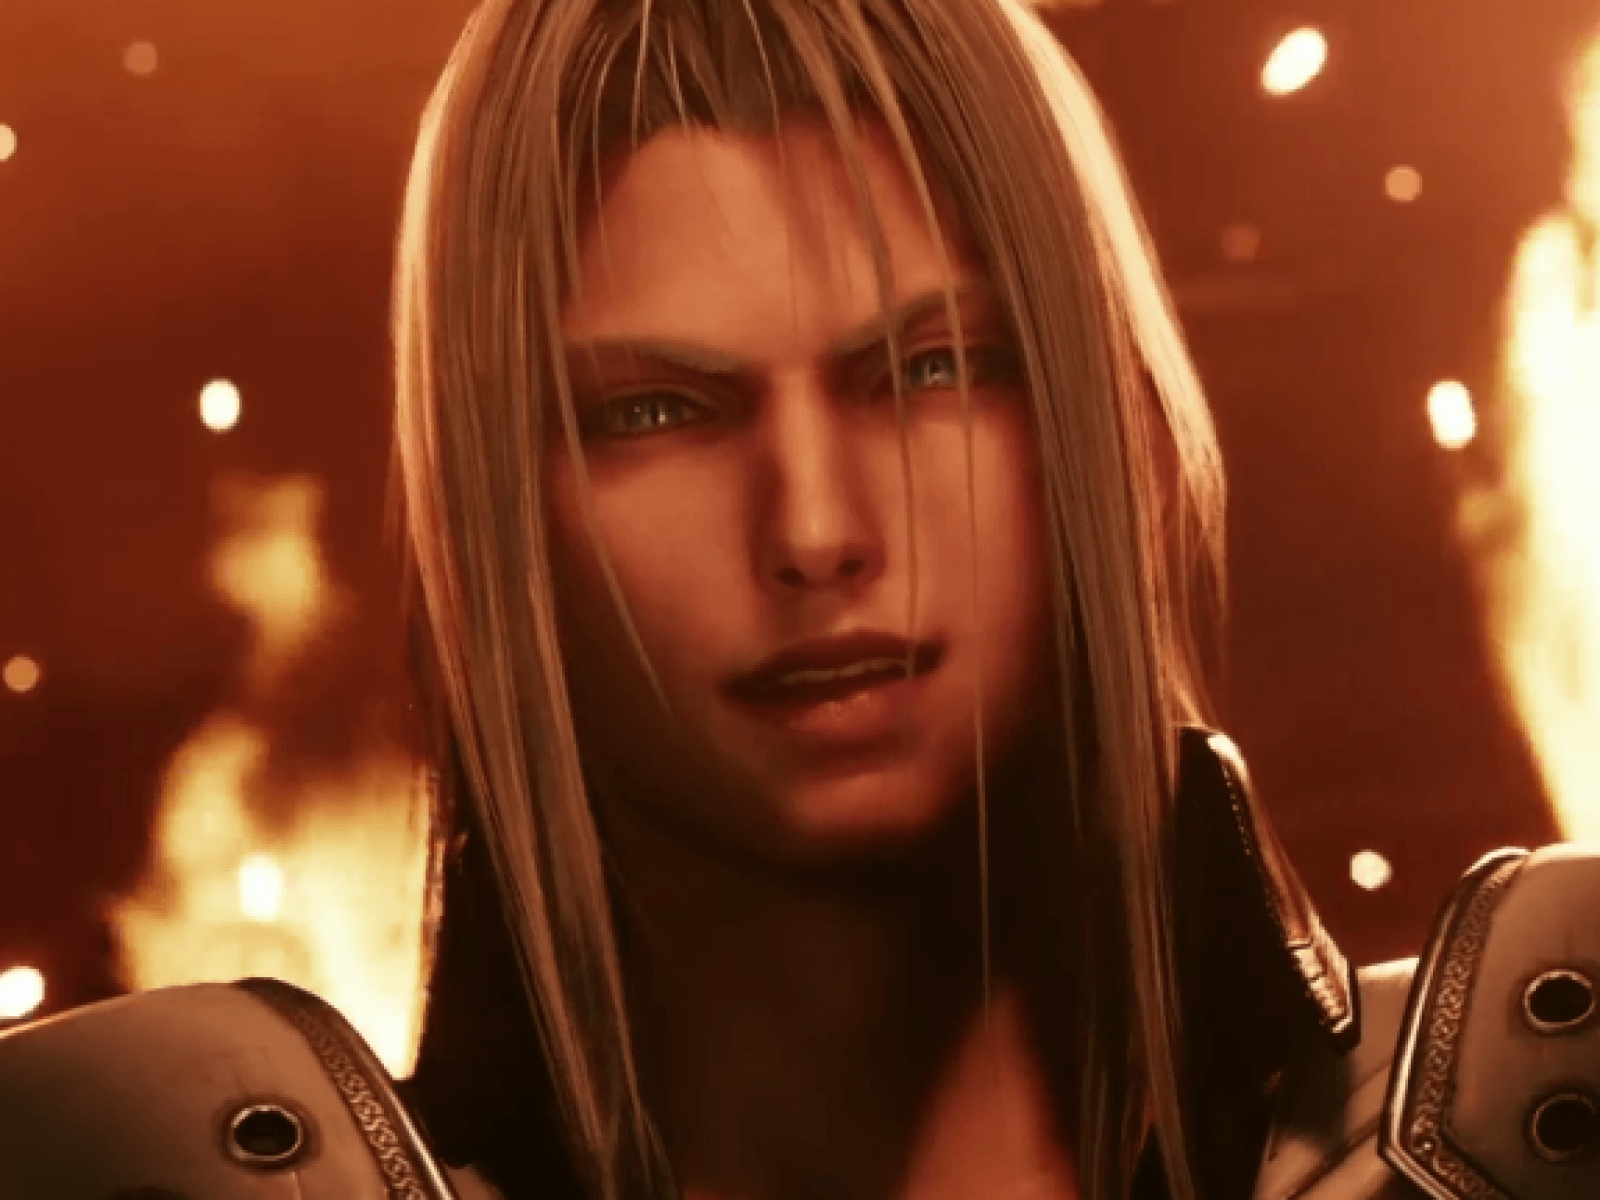 Final Fantasy VII' Remake E3 2019: First Look at Tifa, New Details